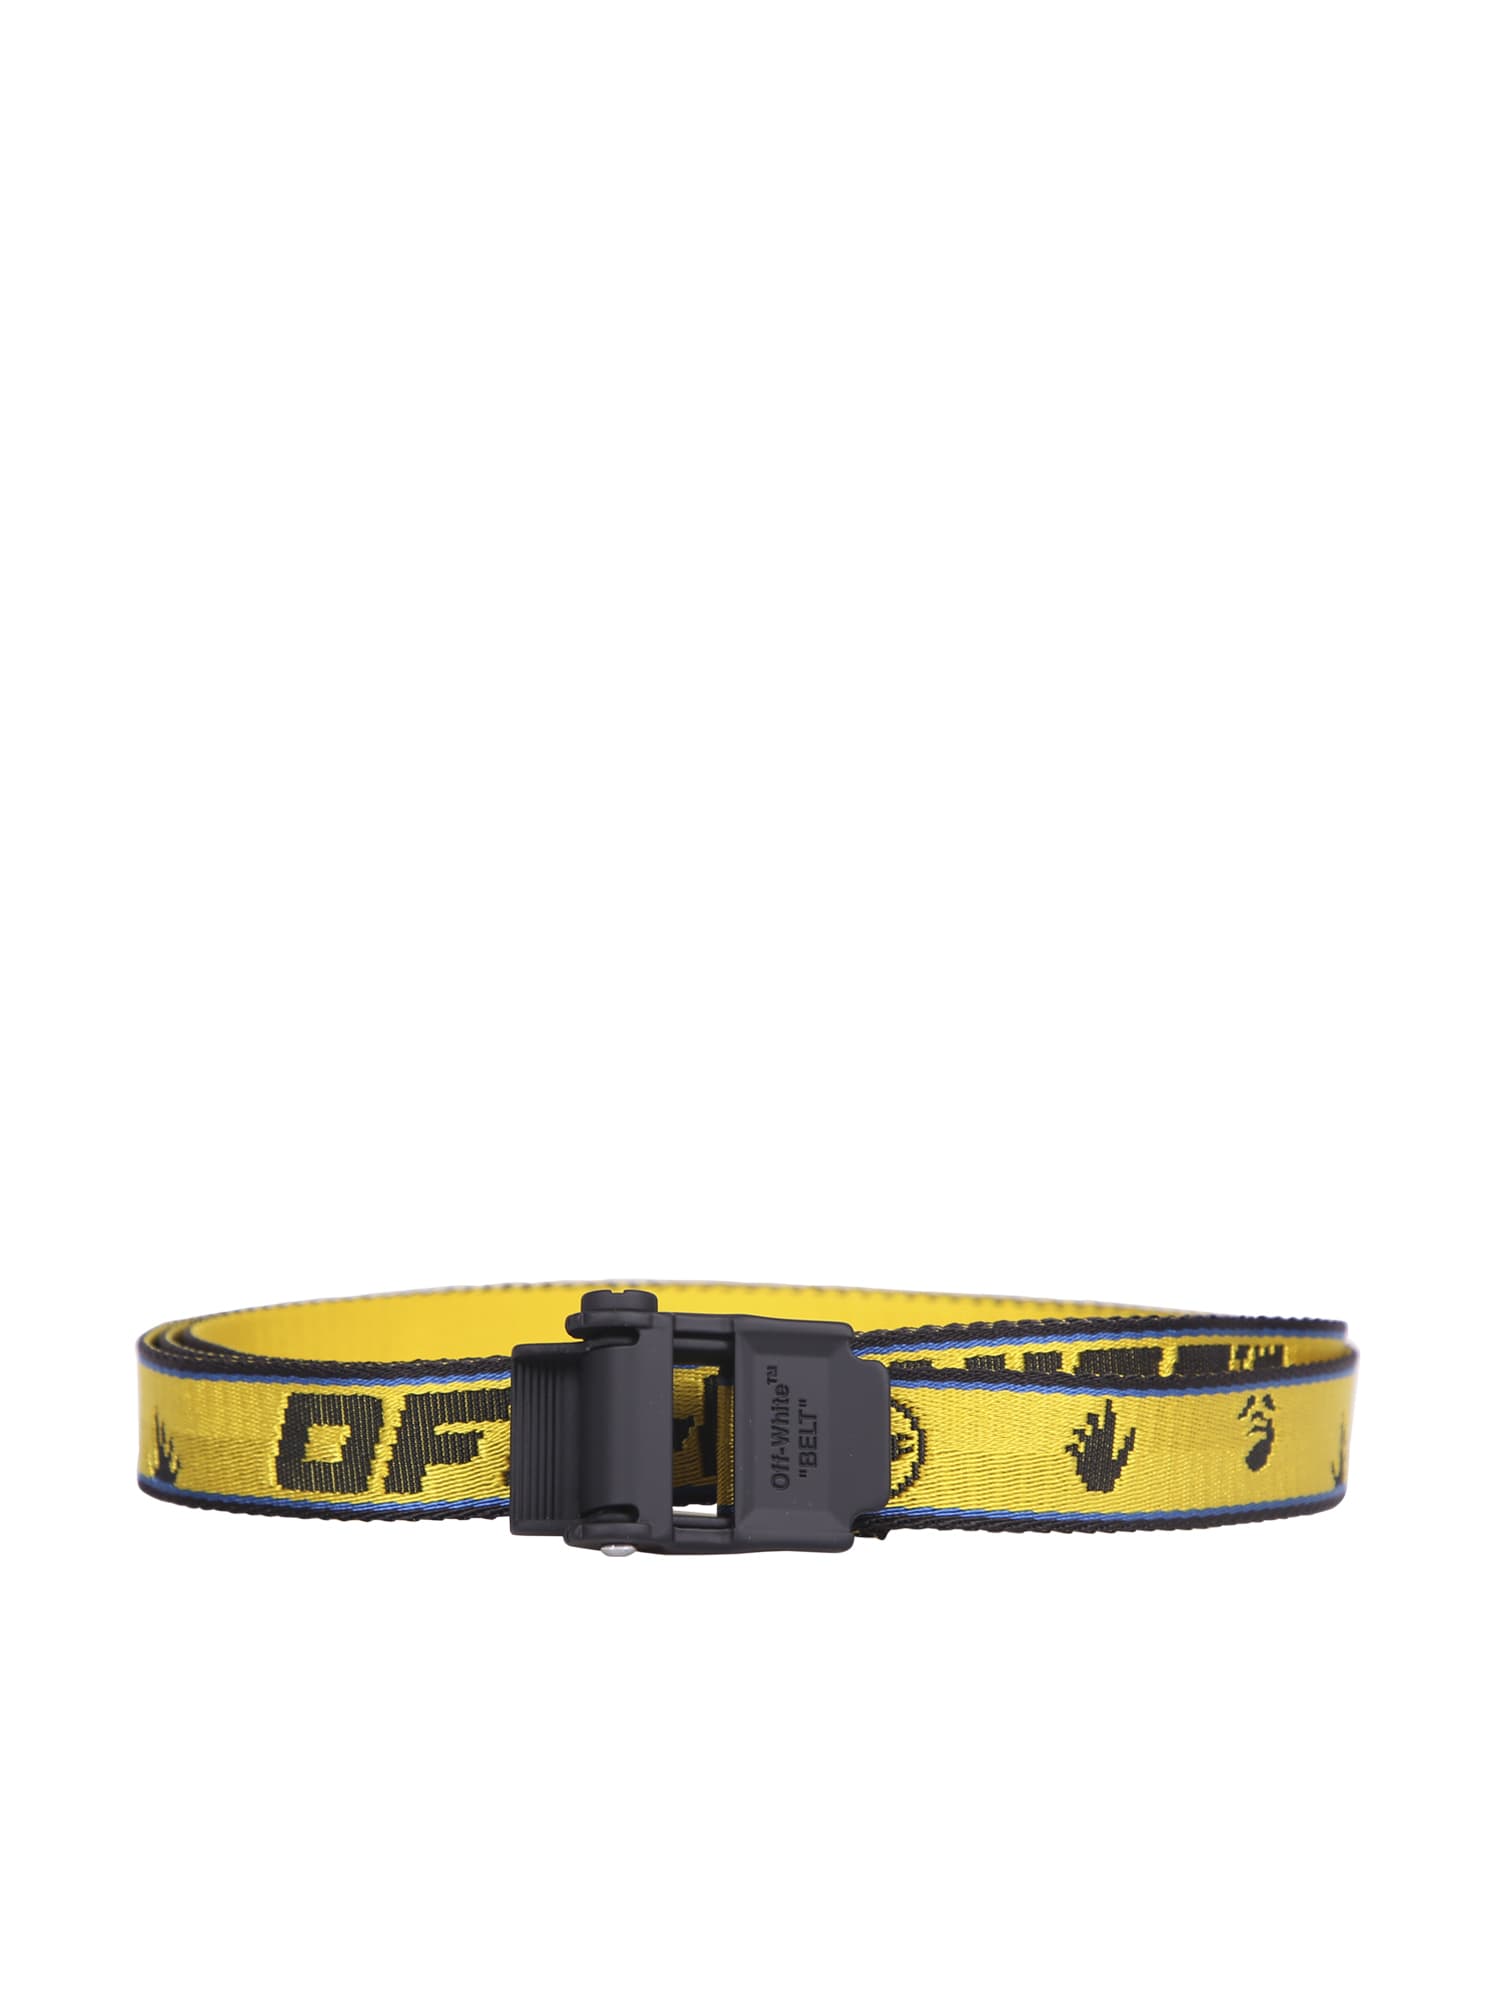 OFF-WHITE INDUSTRIAL BELT,OMRB051S21 FAB001 1810